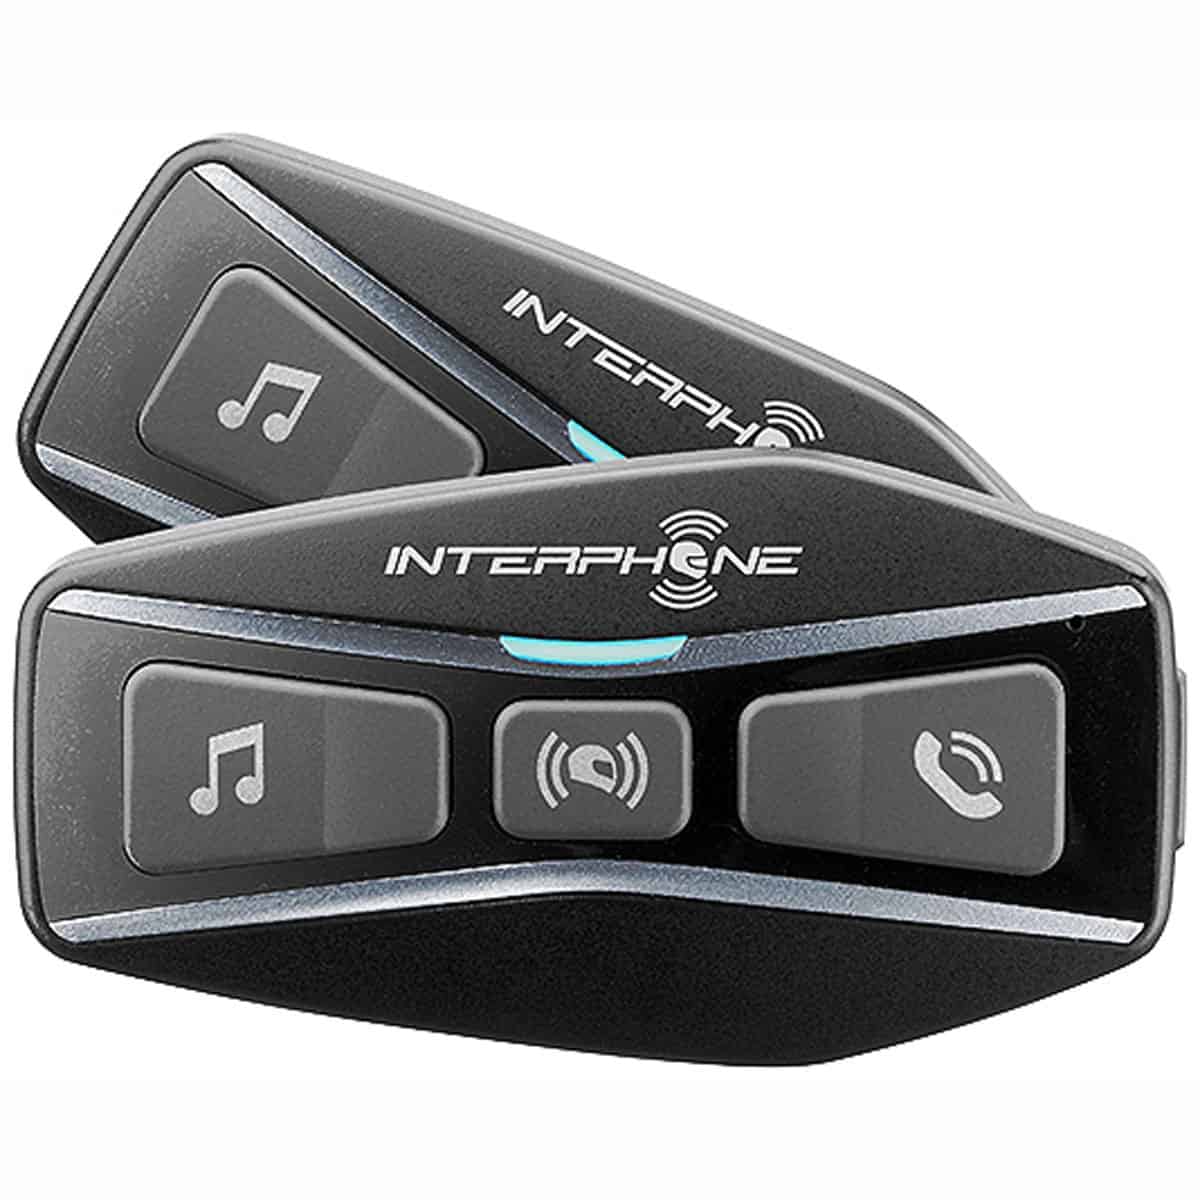 The Interphone U-COM 4 Intercom is the perfect choice for riders who want an easy to use, reliable and advanced Intercom system.